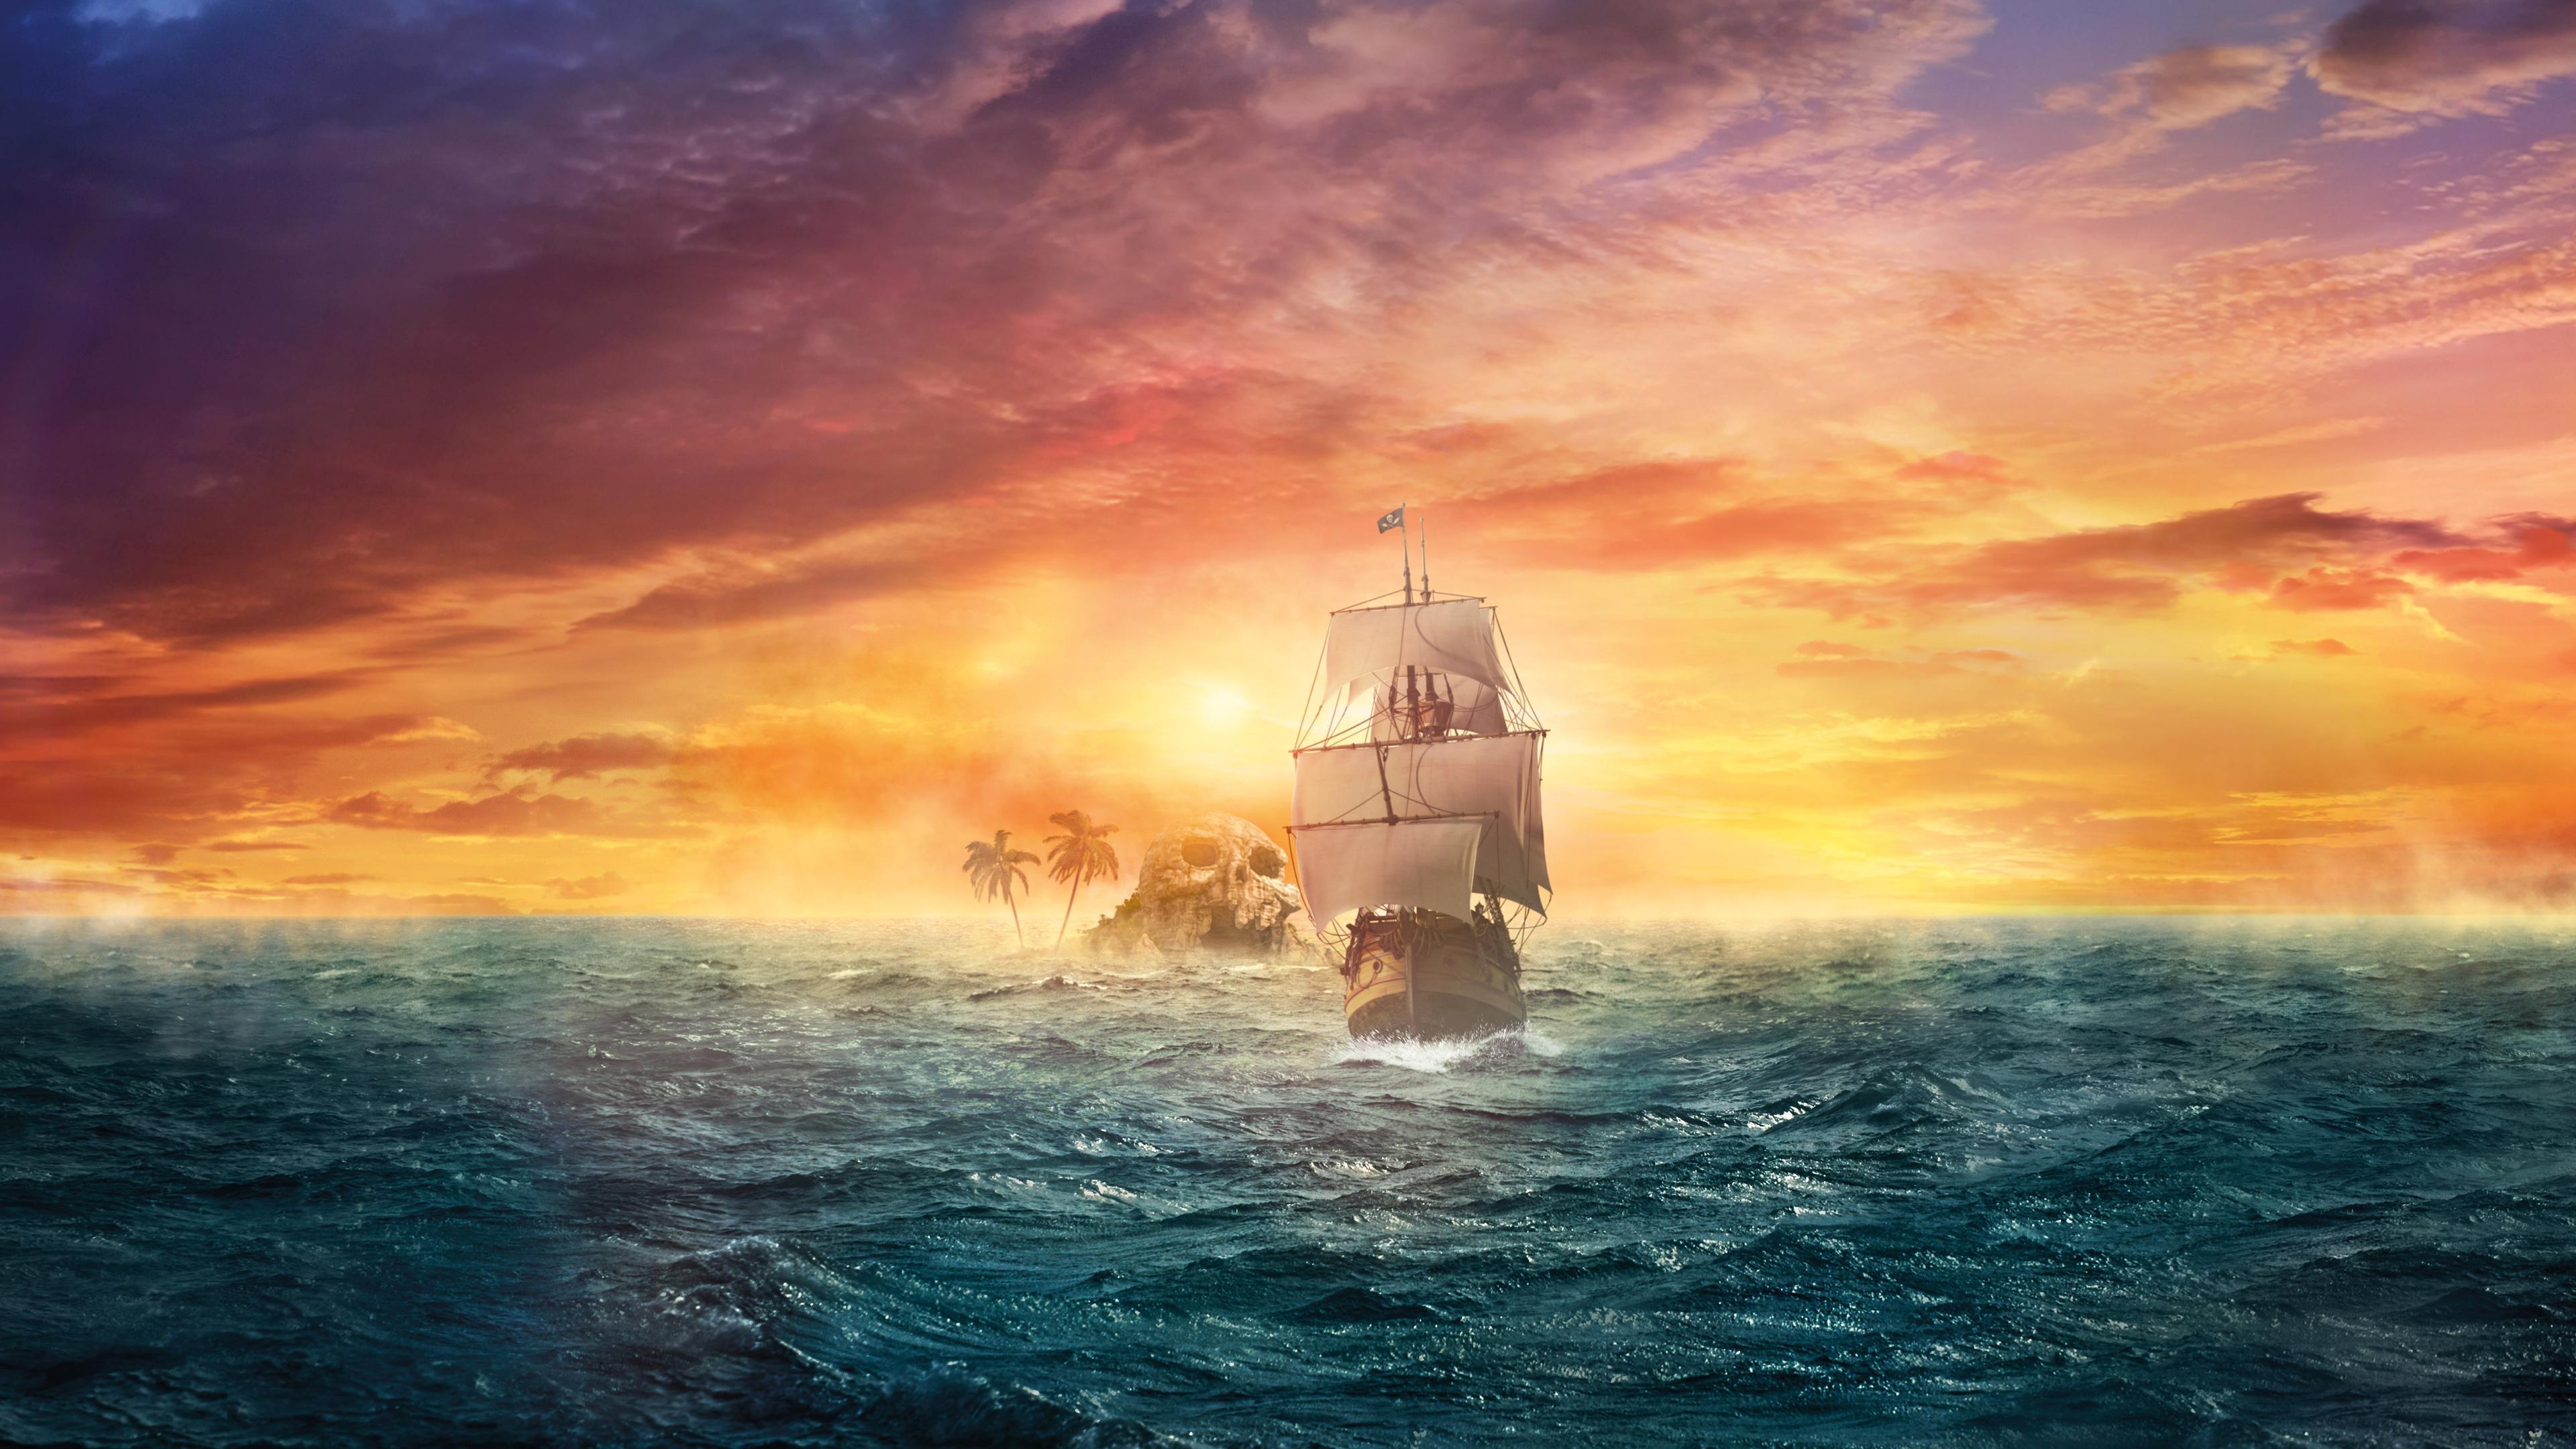 Pirate Ship Live Wallpaper live backgrounds for Android   APK